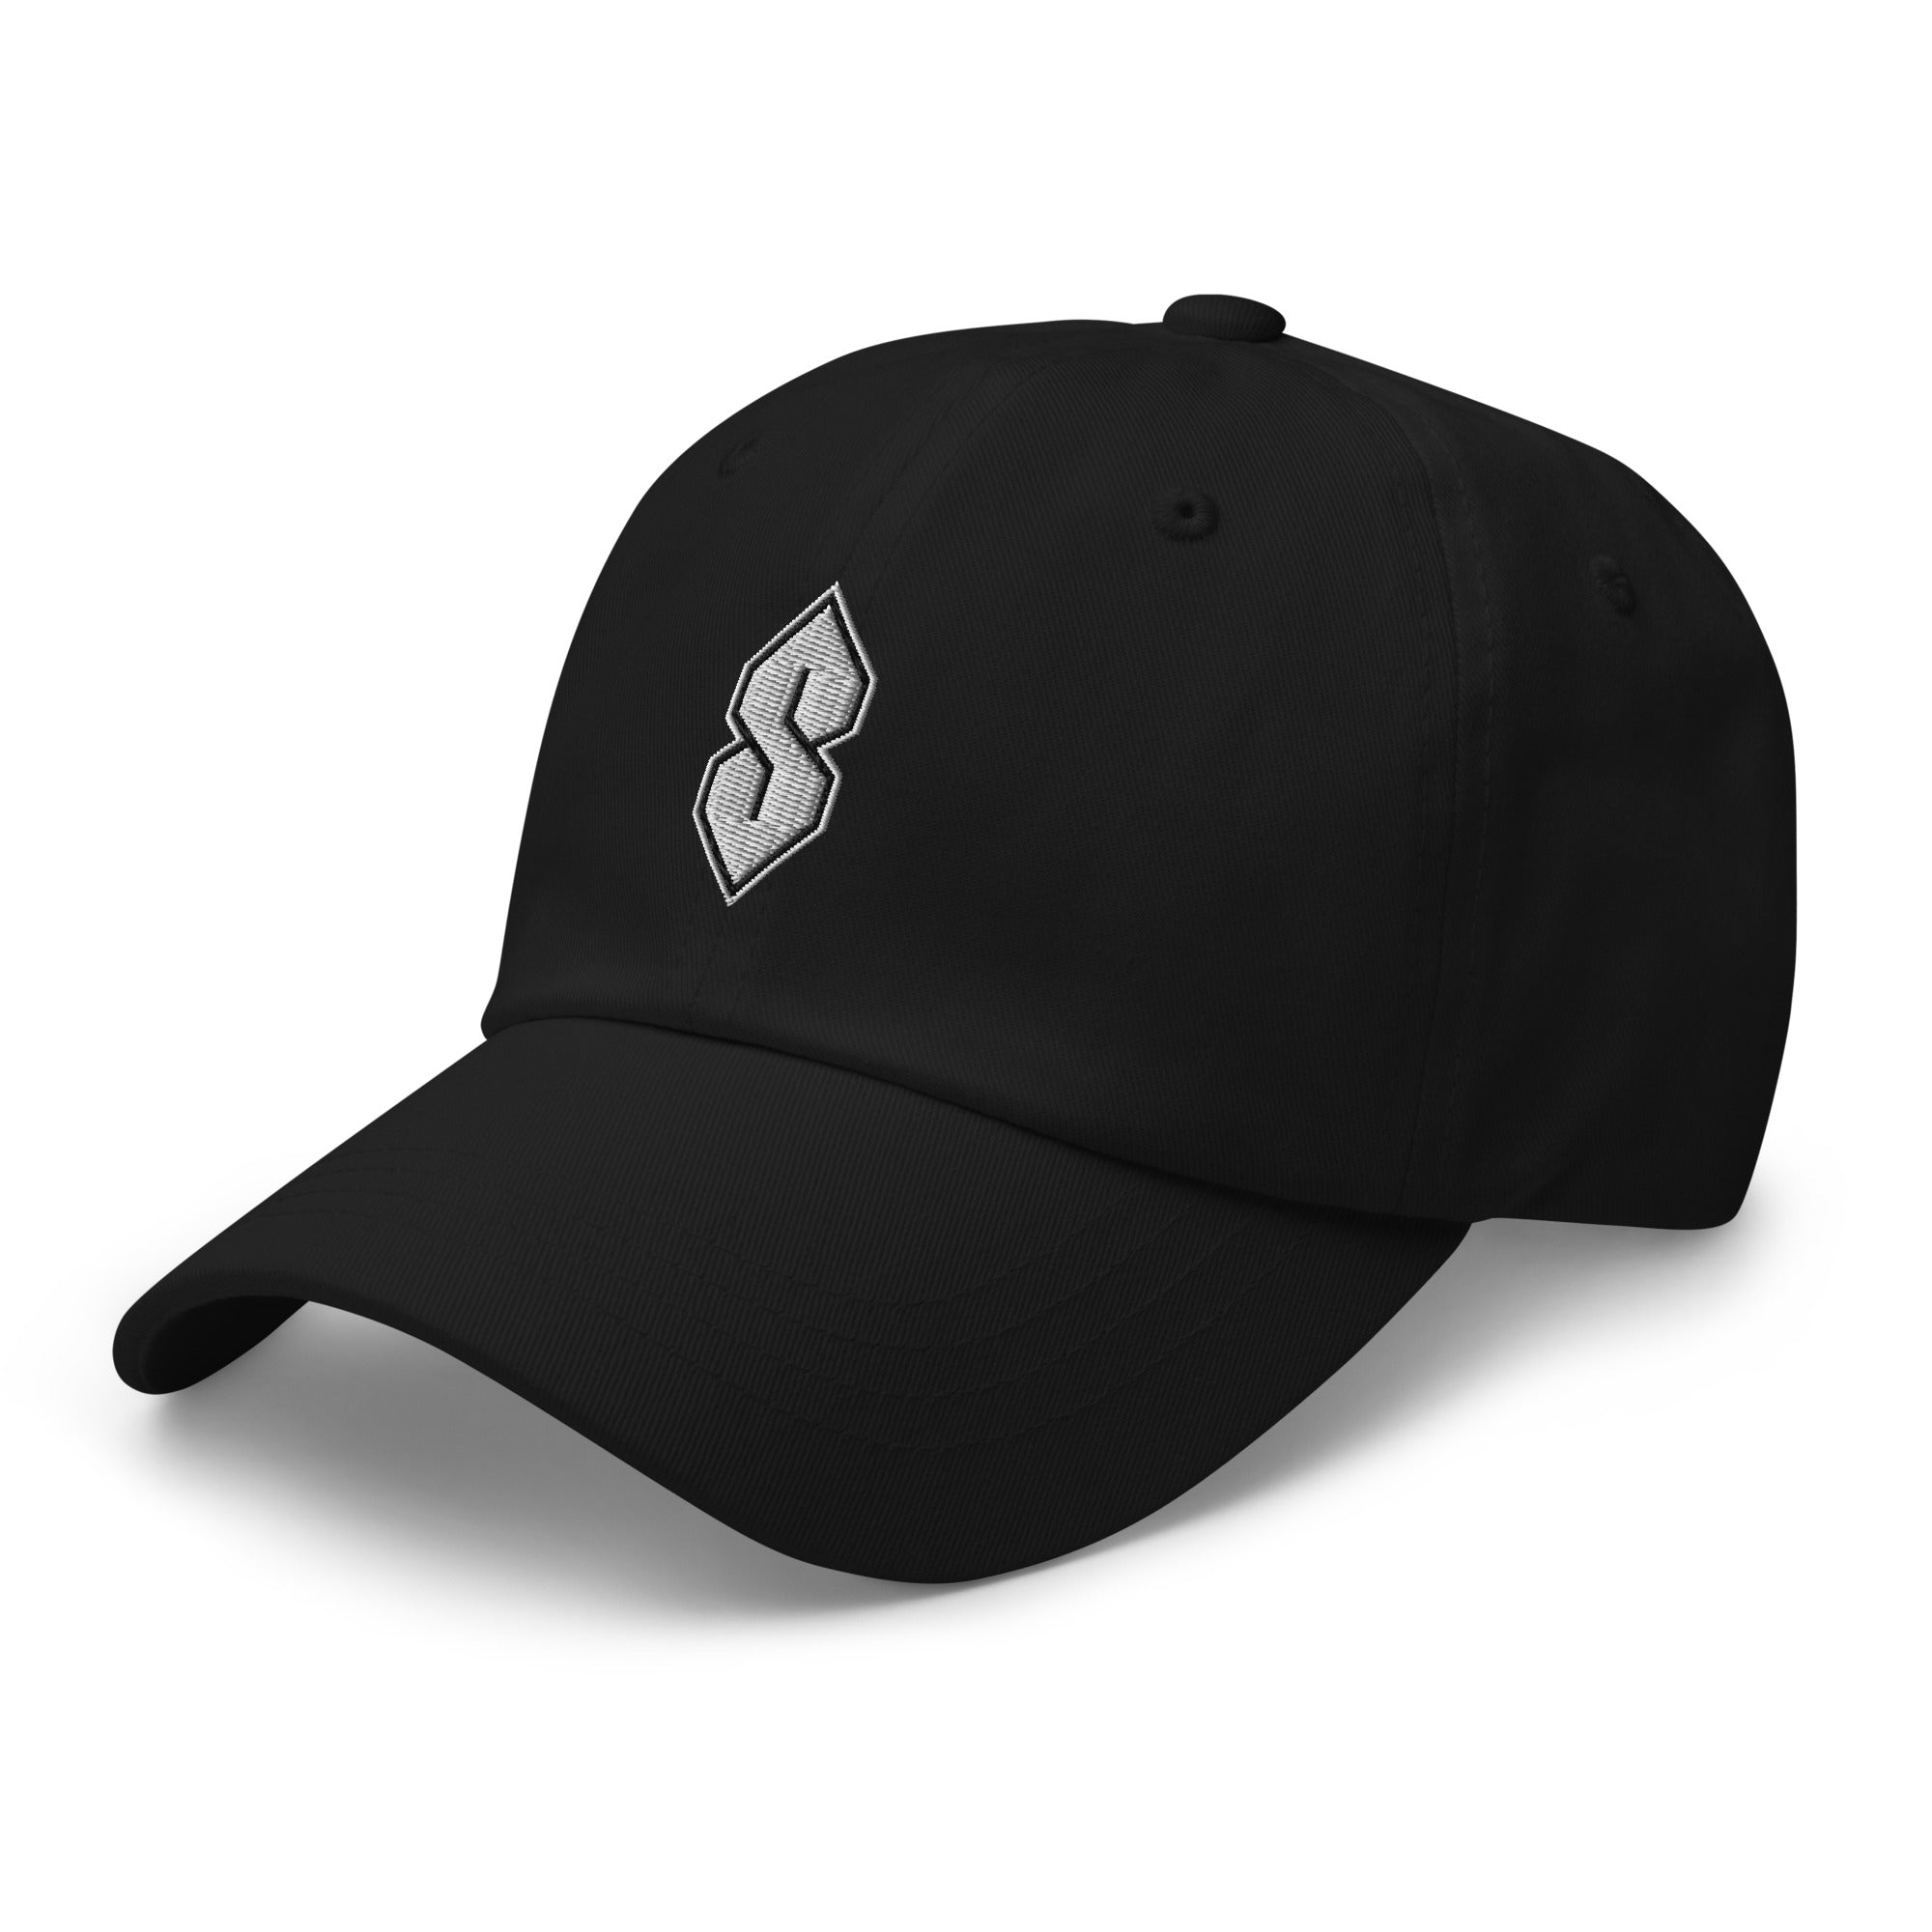 Cool S, Graffiti S, Middle School S Embroidered Baseball Cap Dad hat White Thread - Edge of Life Designs